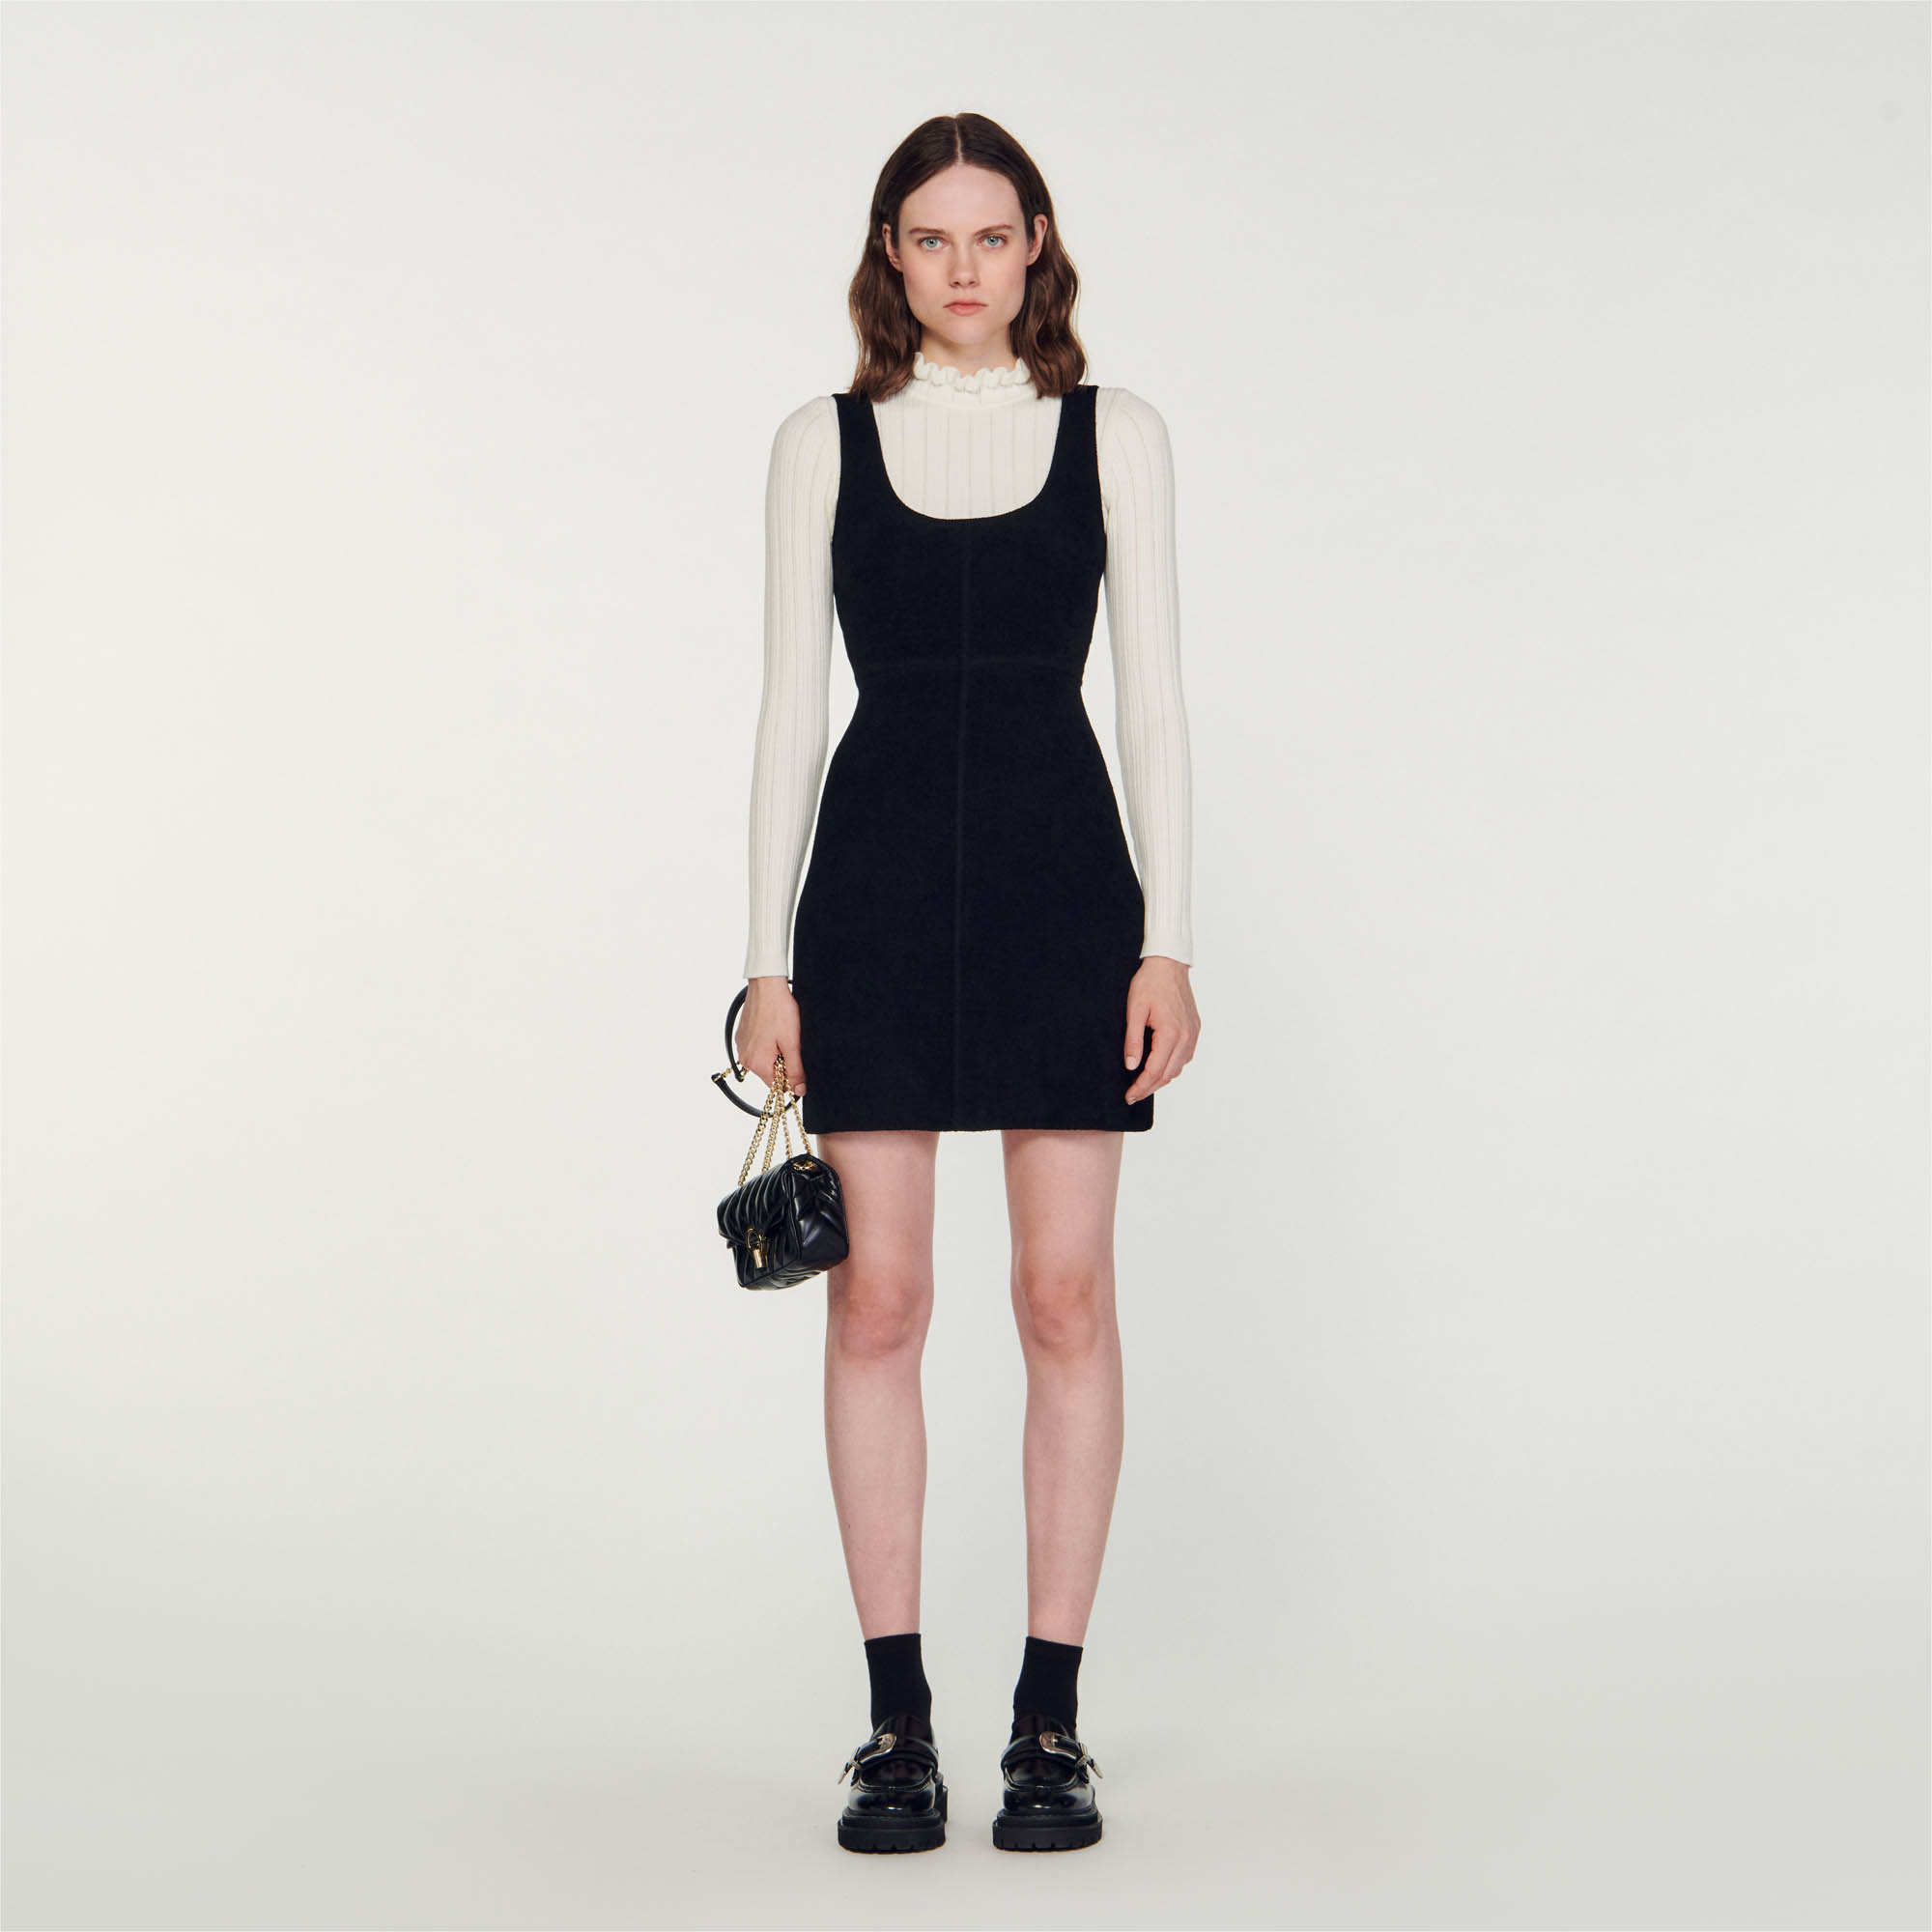 Sandro acrylic 2-in-1 effect pinafore dress in two-tone knit featuring a tight-fitting top with ruffled high neck and long sleeves and a layered velvet dress on top with flat straps and scoop neck